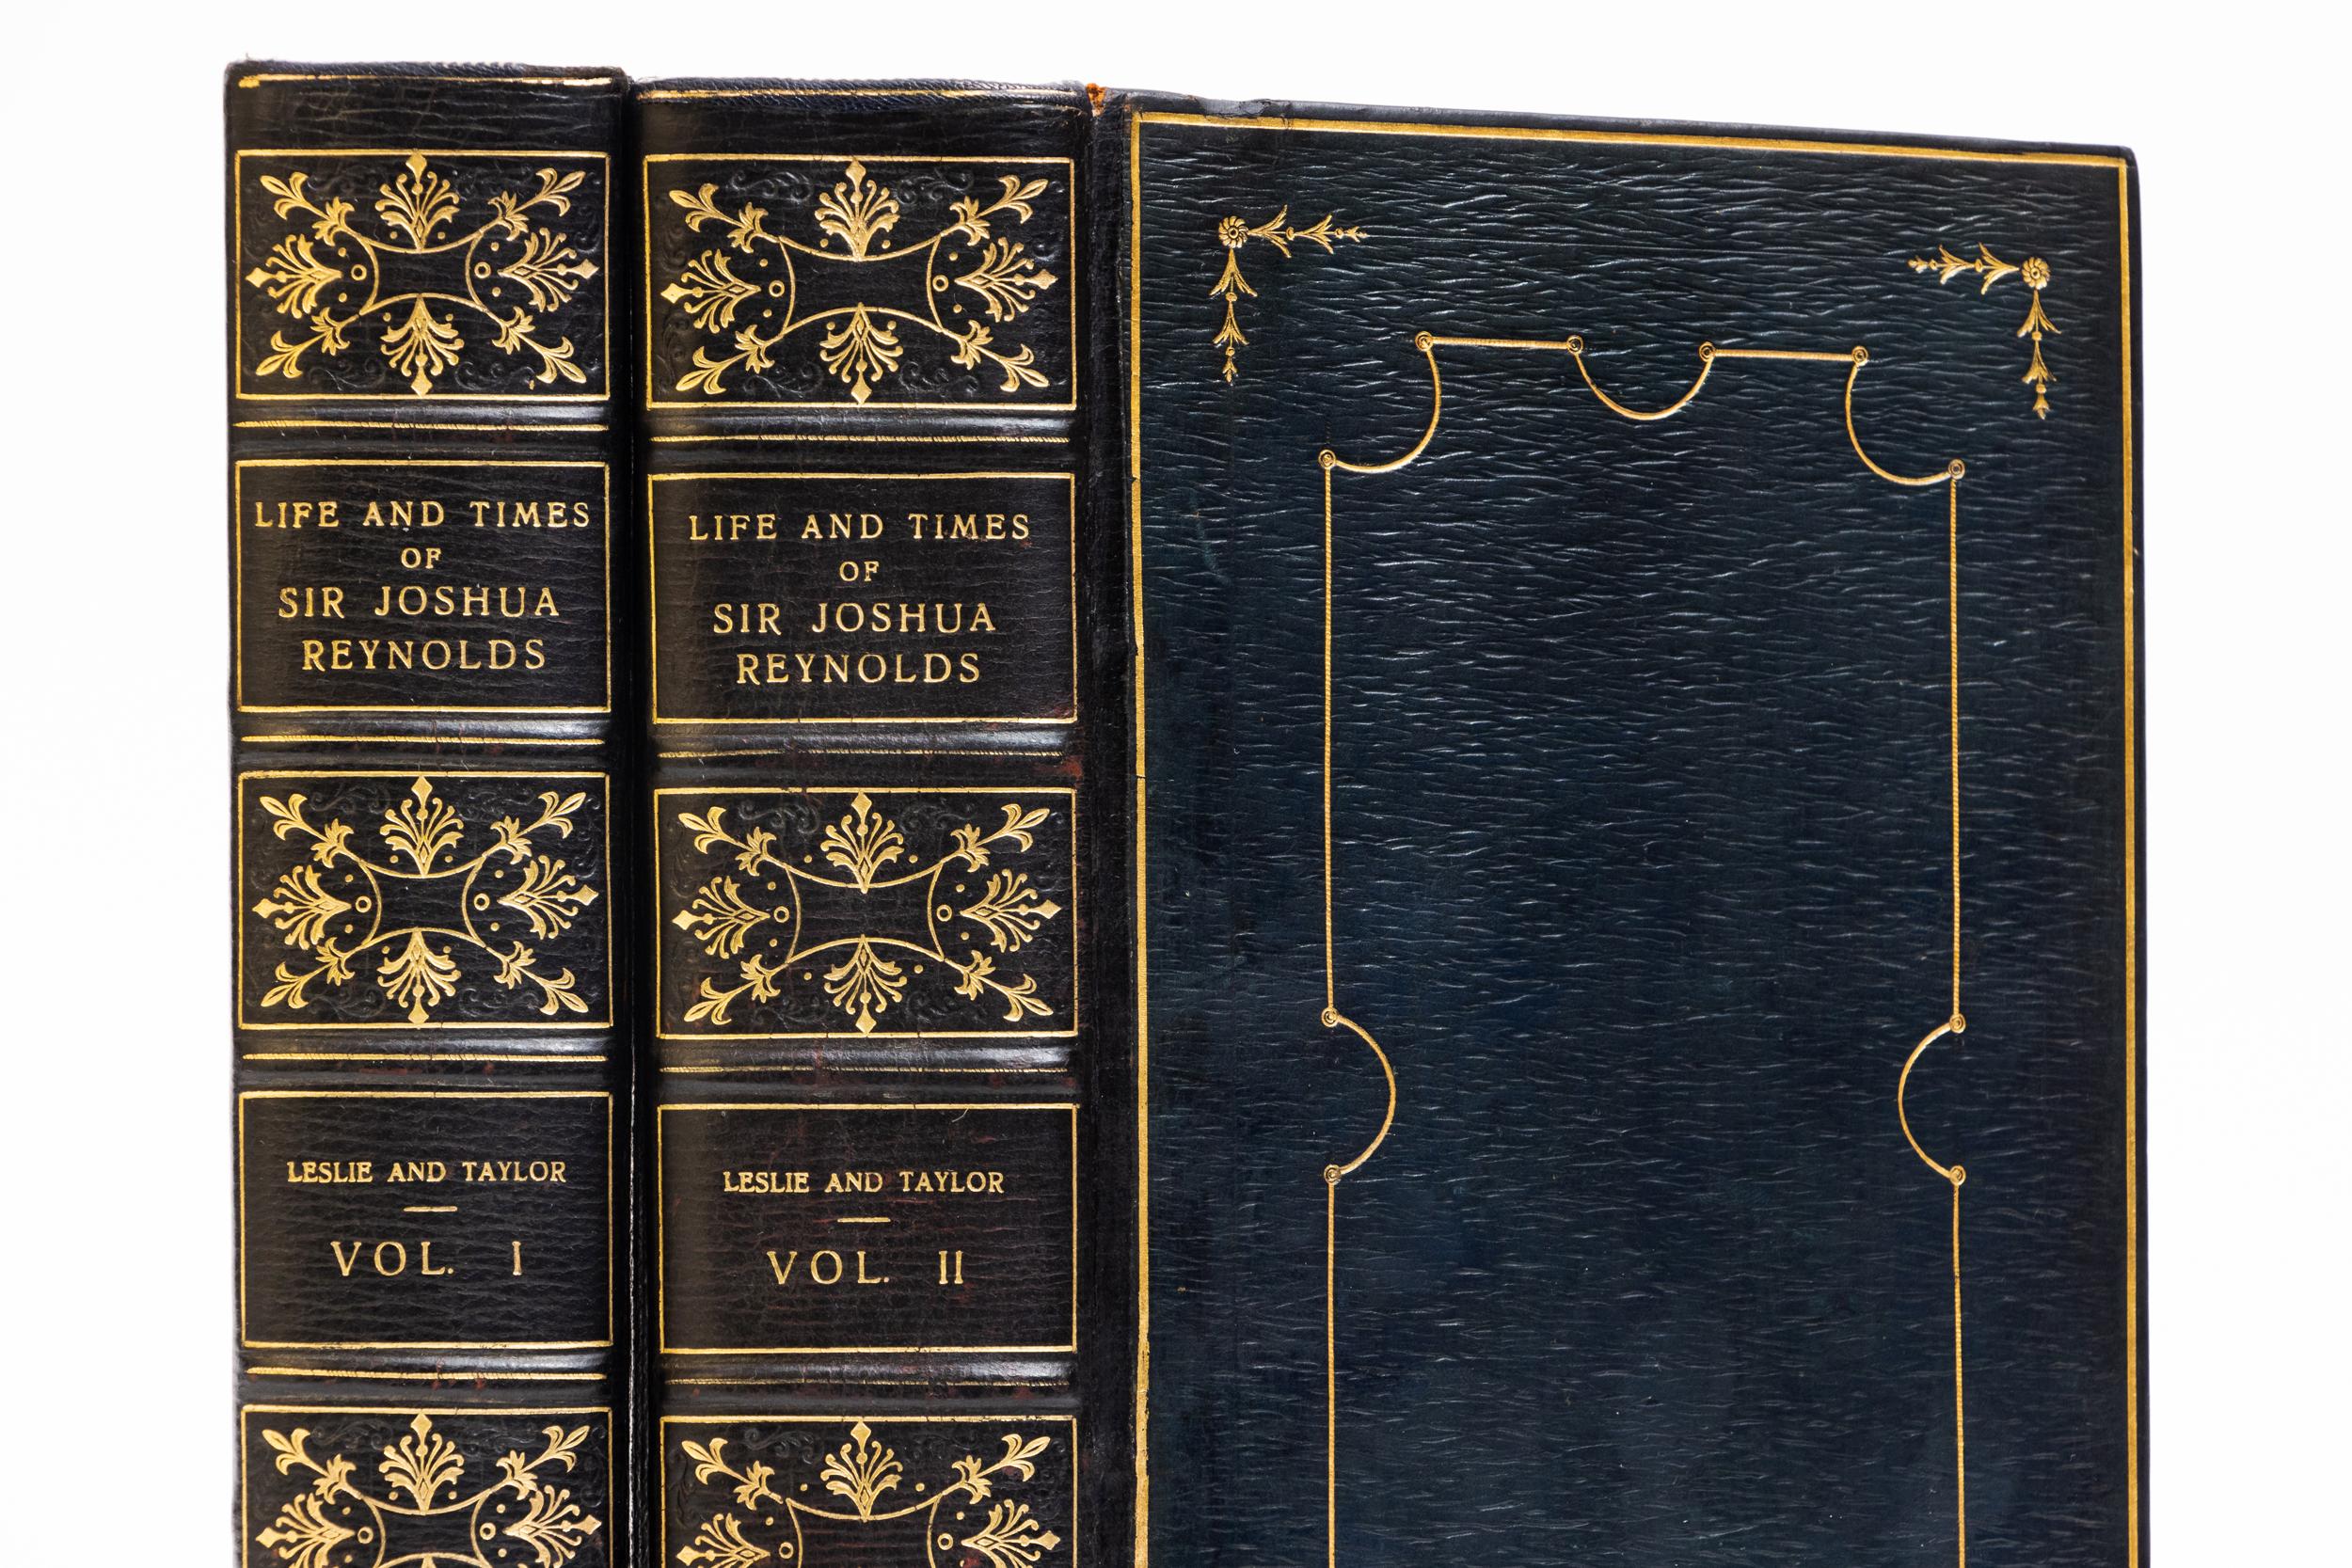 2 Volumes. Sir Joshua Reynolds, Life and Times of Sir Joshua Reynolds. Bound in full blue morocco. Decorative gilt tooling on covers. Raised bands. Decorative gilt-tooling on spines. All edges gilt. Marbled endpapers. Illustrated. Published: London;